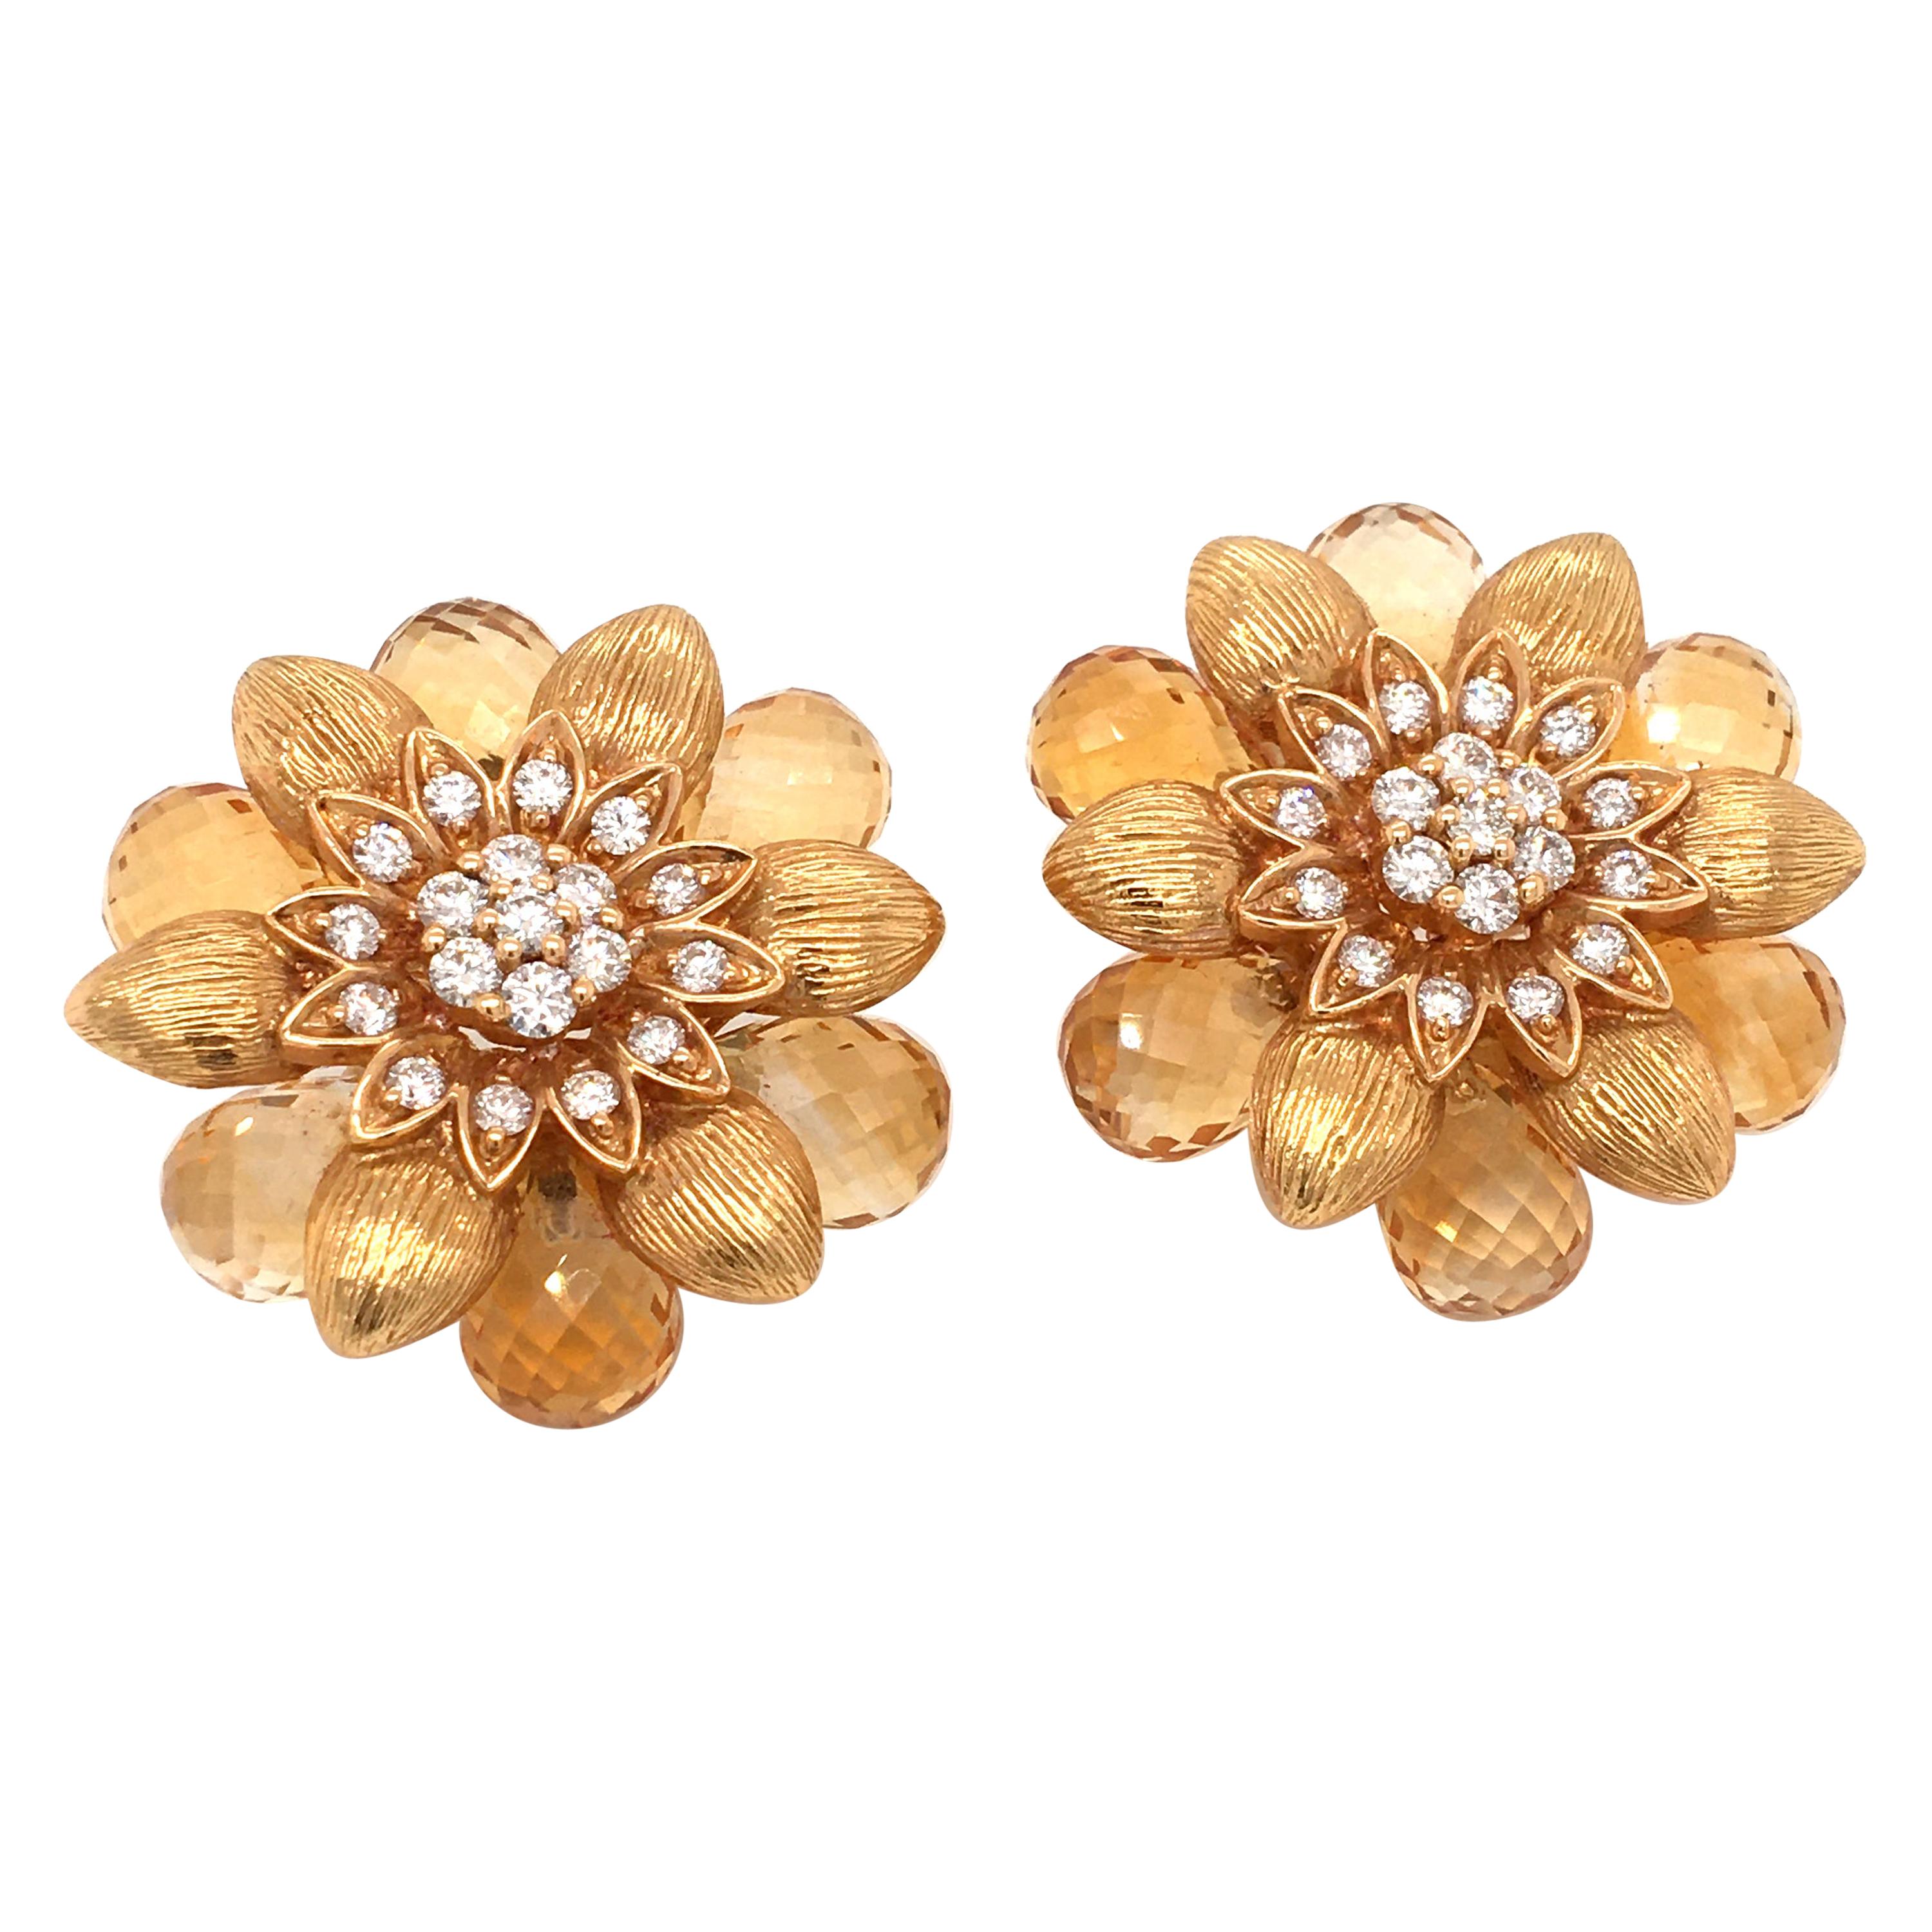 18 Karat Yellow Gold Citrine Flower Design Pair of Earrings Made in Italy For Sale